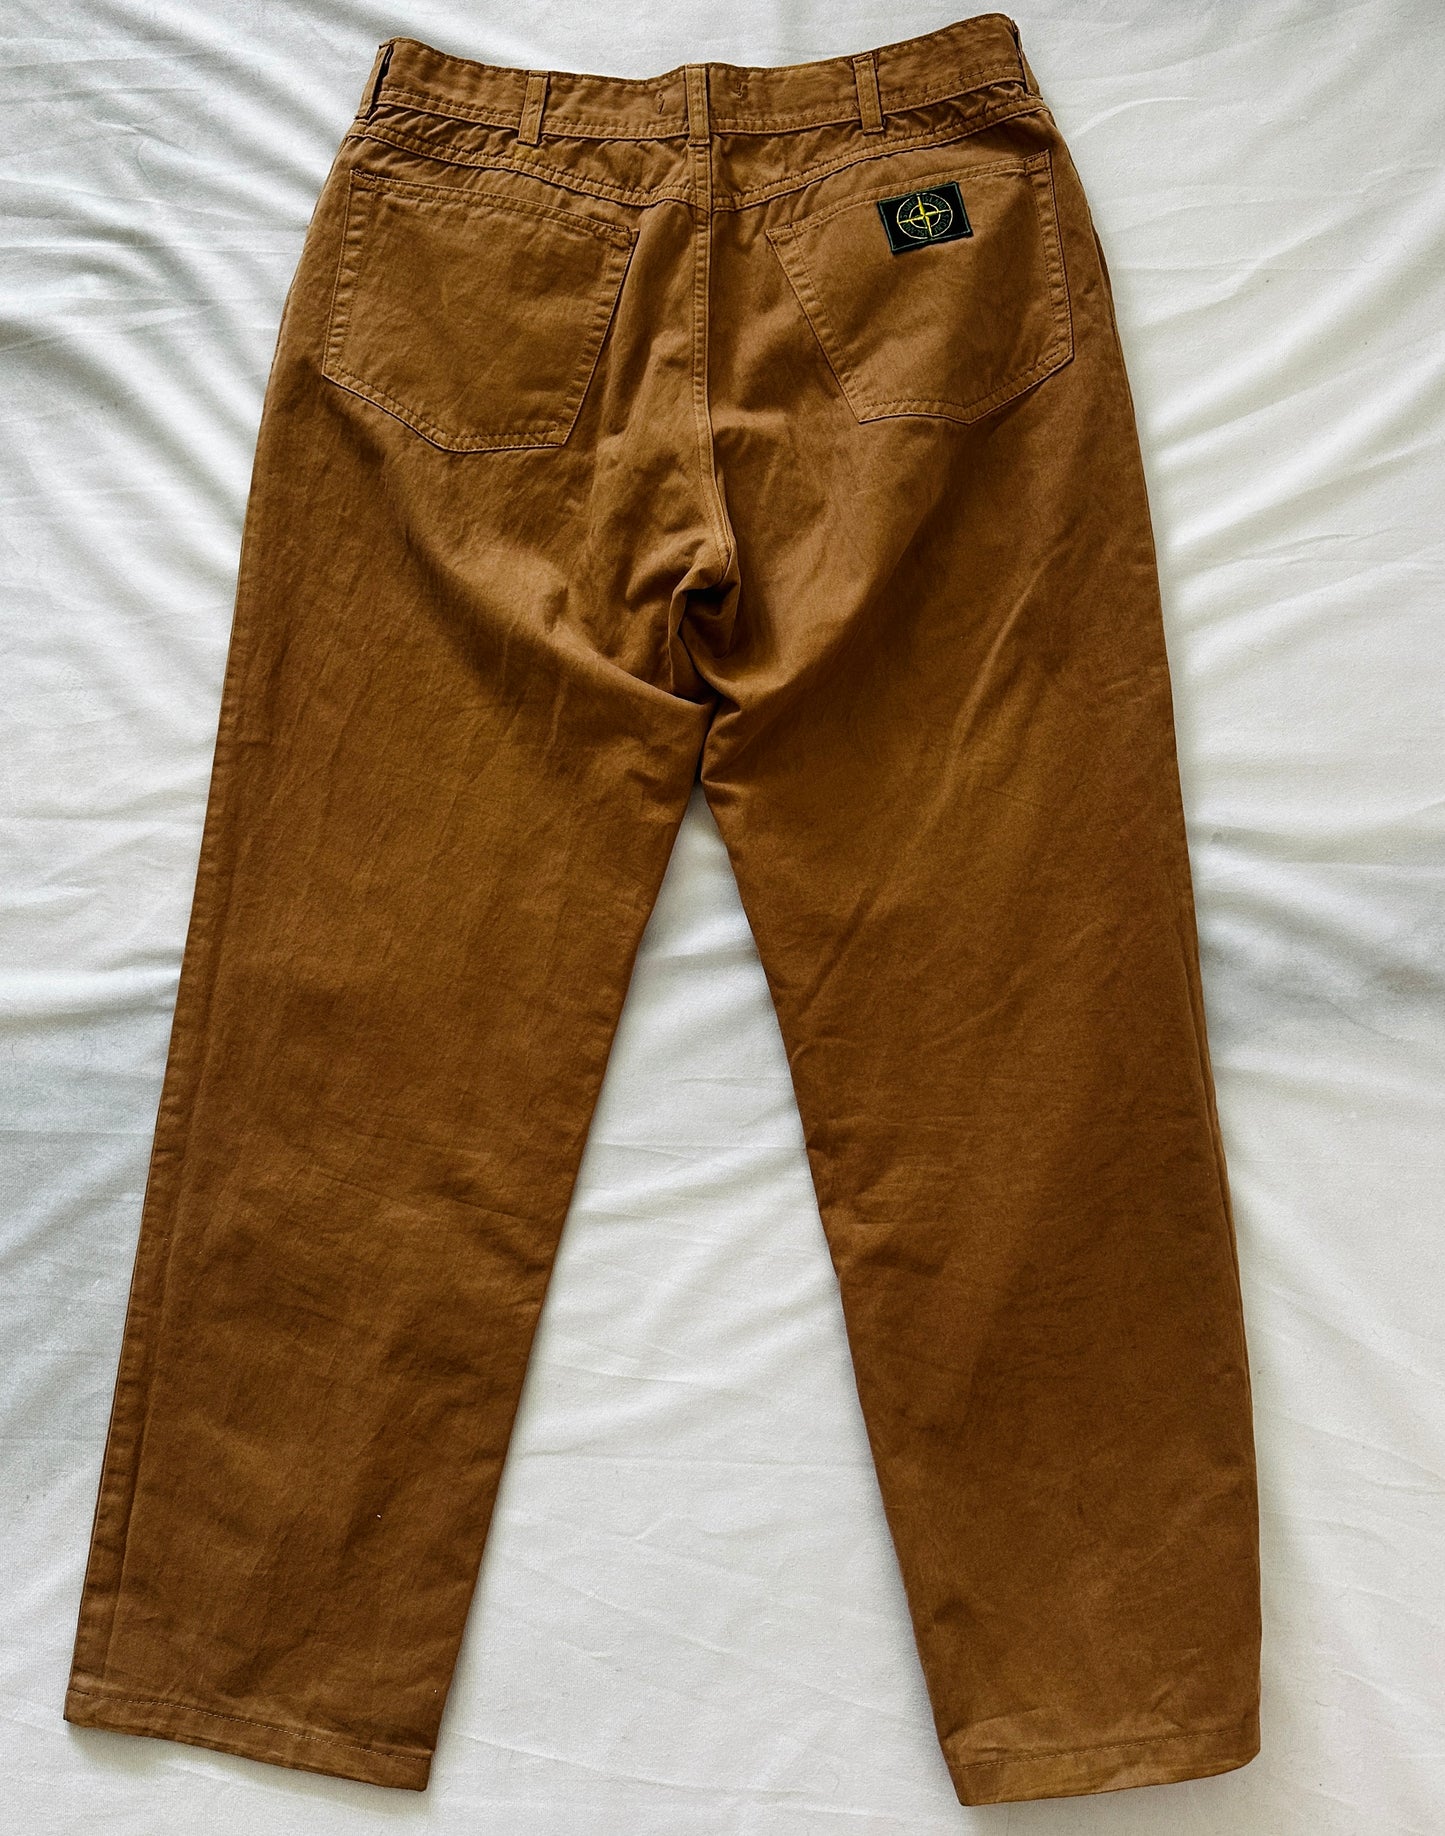 Stone Island 80s Massimo Osti Trousers - 50 - Made in Italy